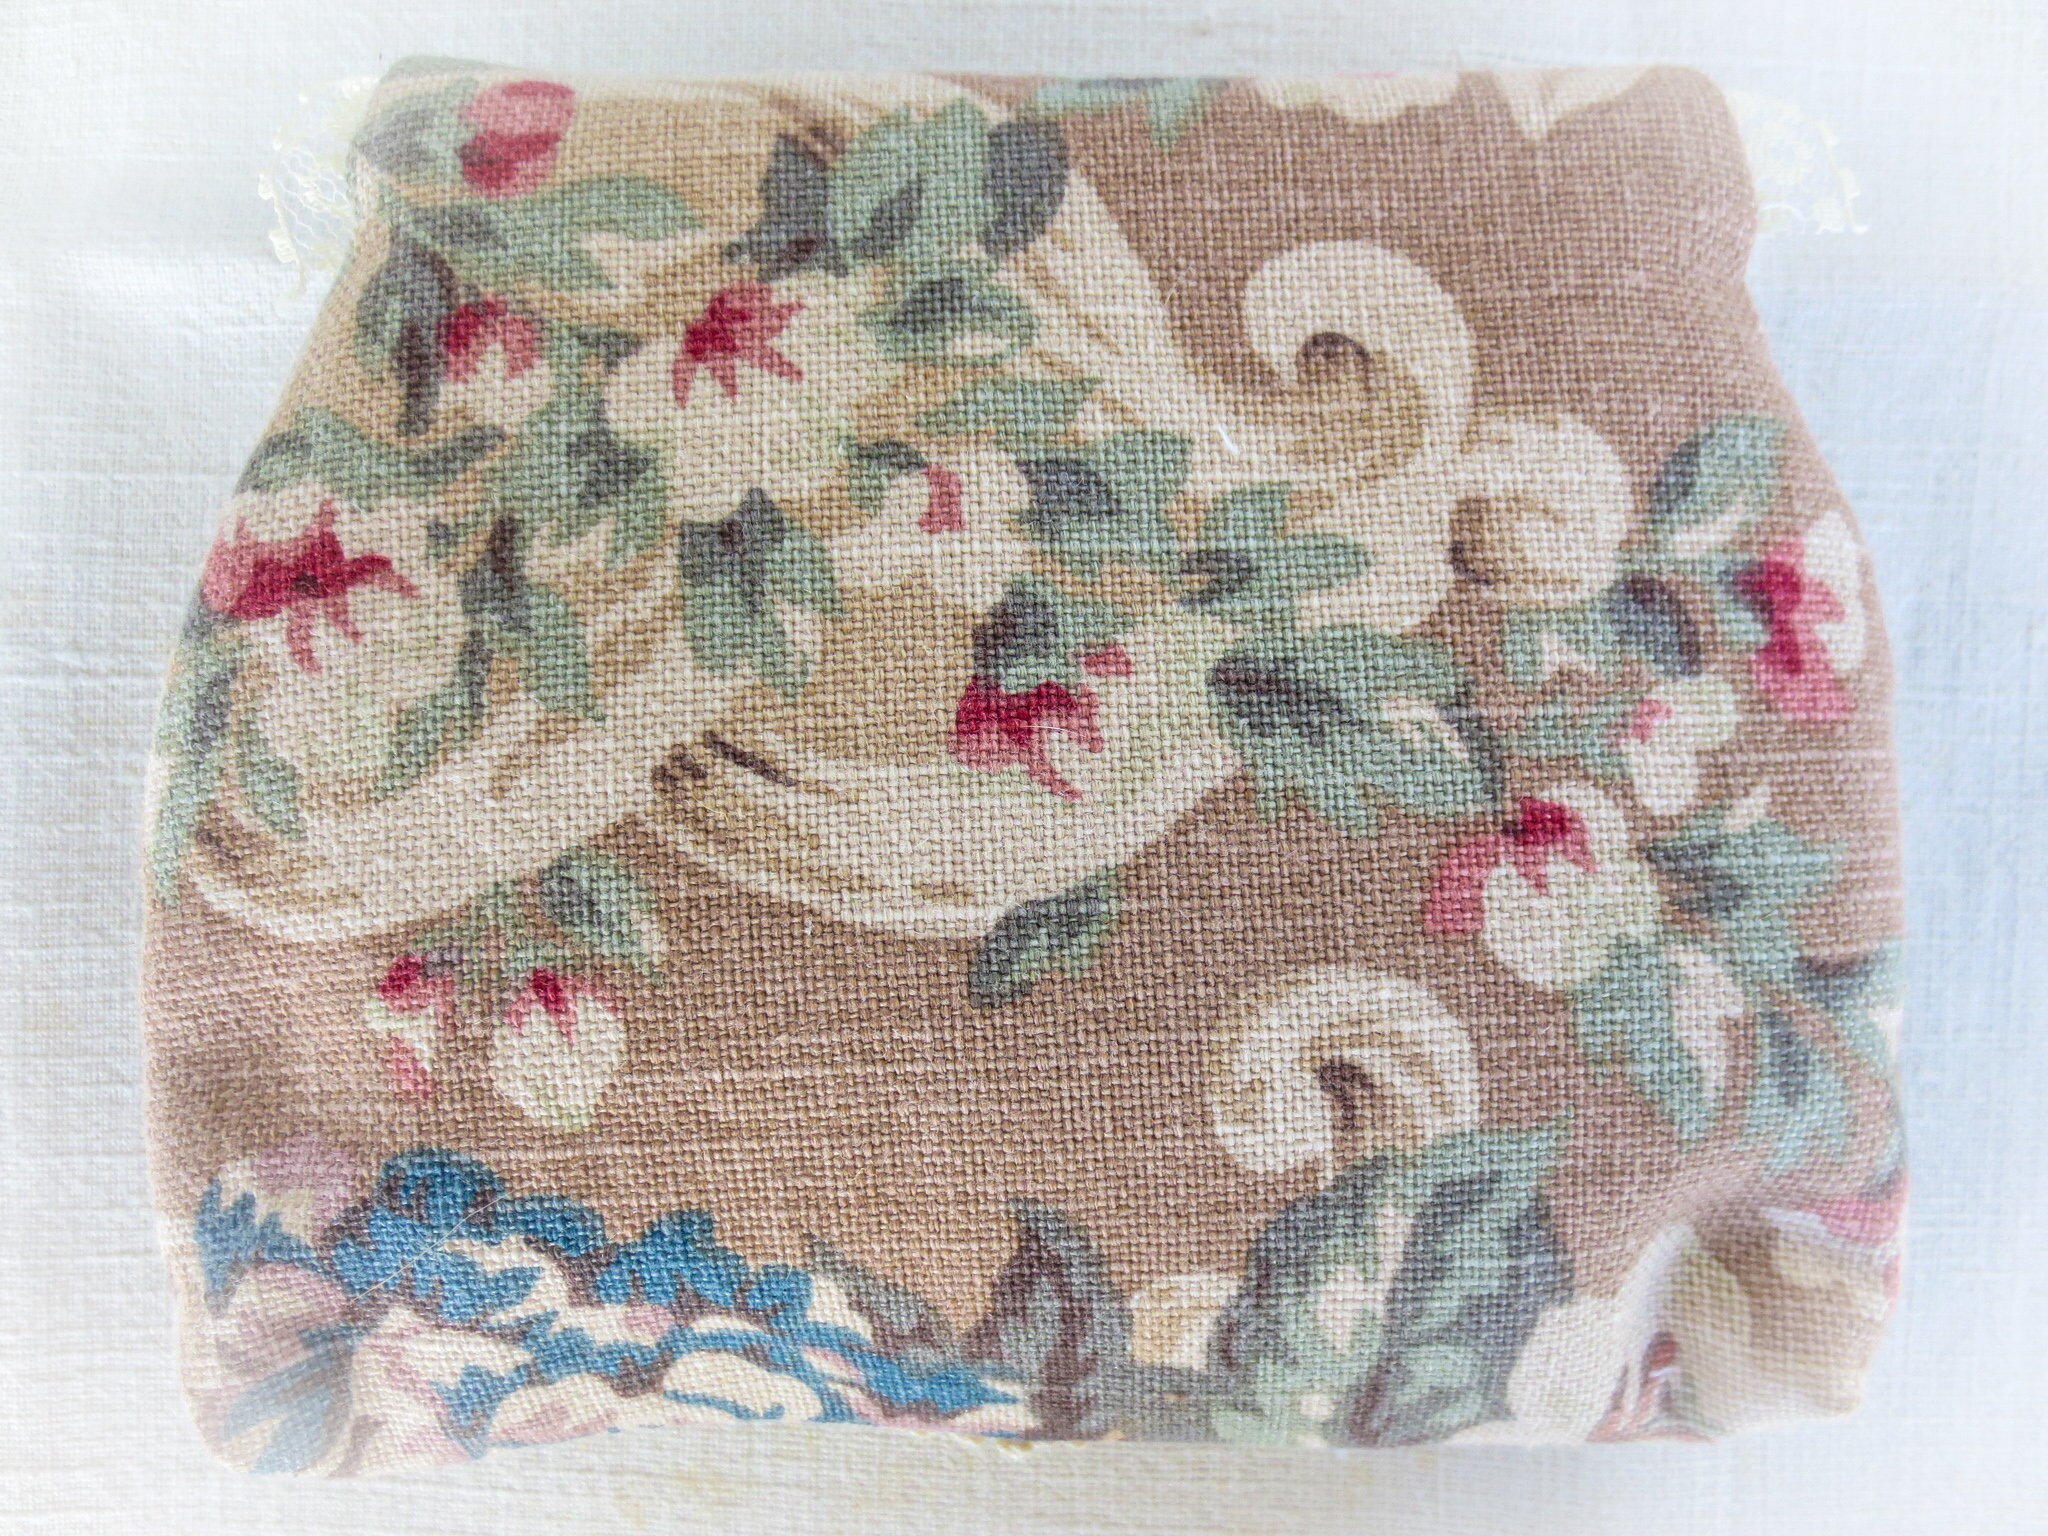 Vintage lace zipper pouch full of vintage french sewing notions